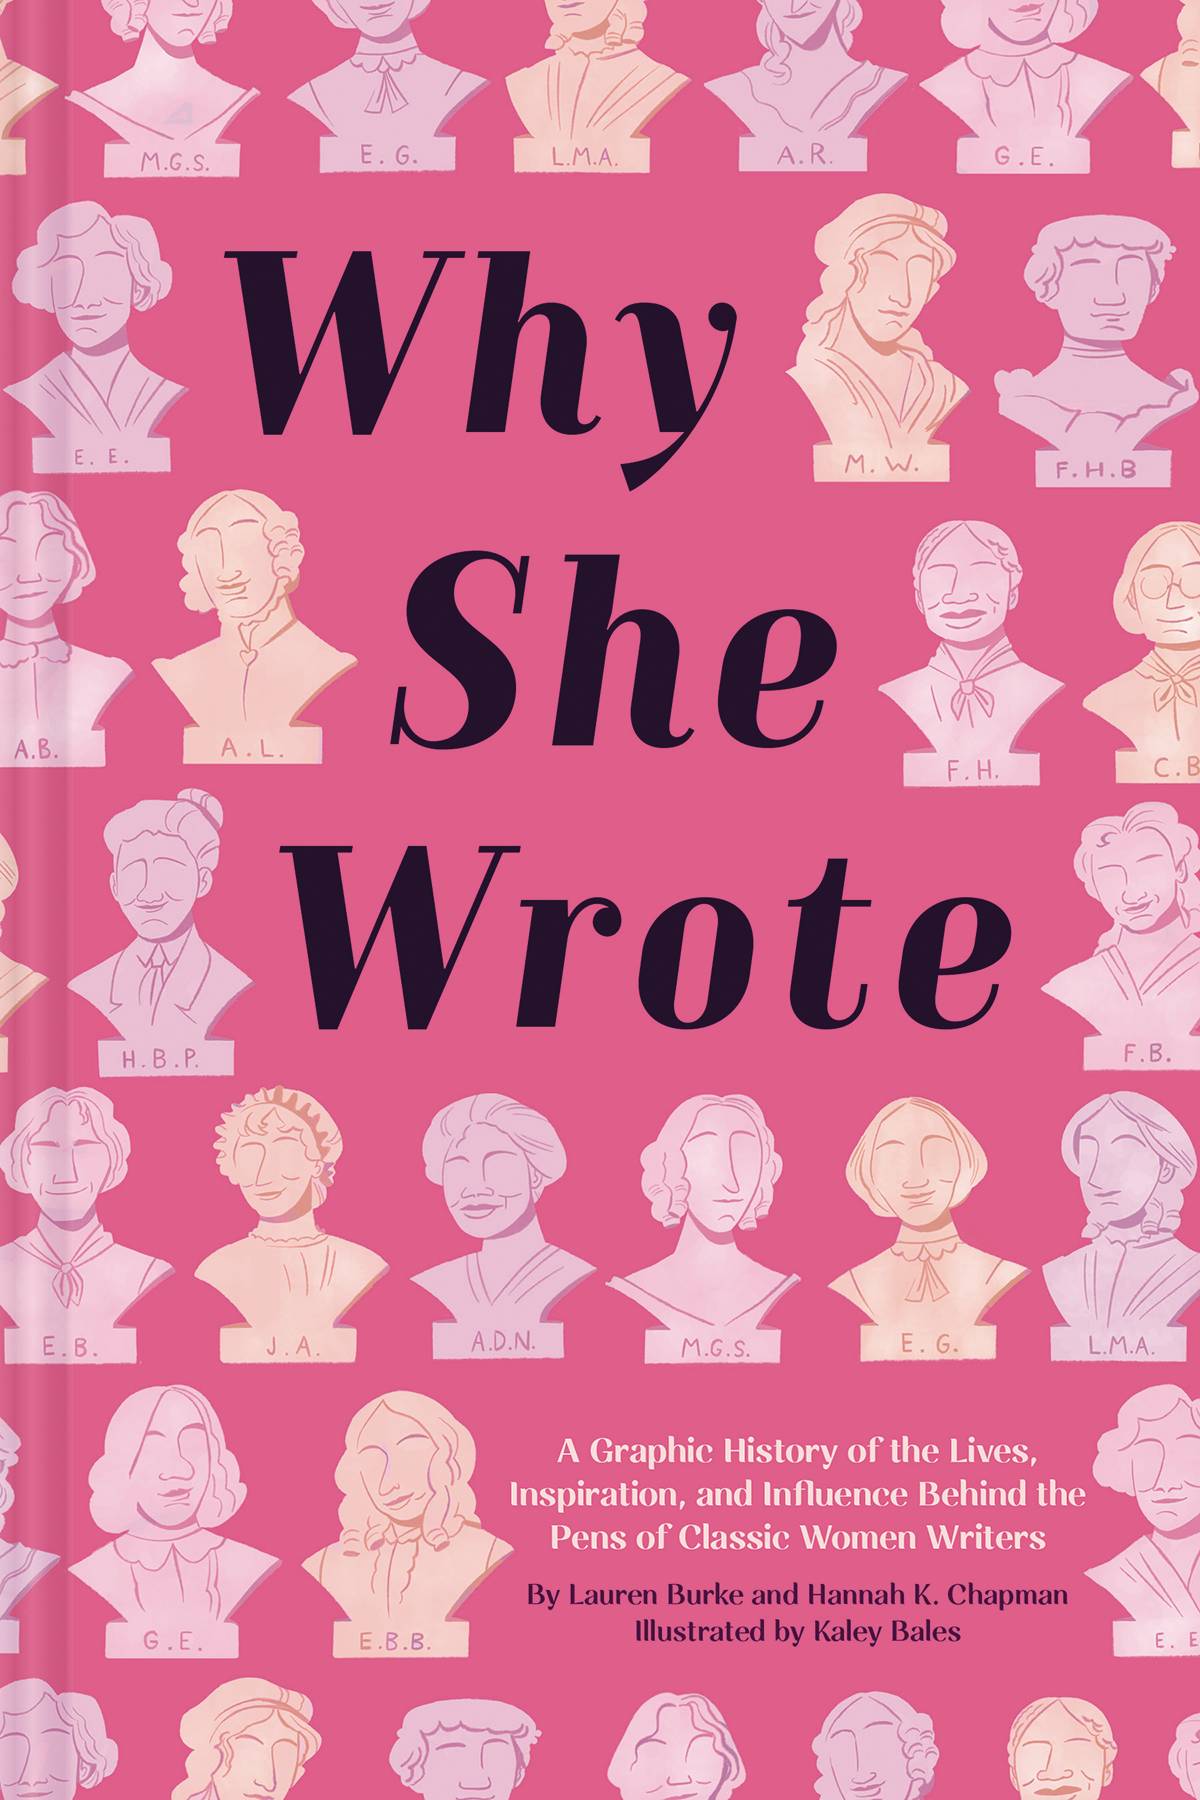 WHY SHE WROTE TP GRAPHIC HISTORY OF CLASSIC WOMEN WRITERS